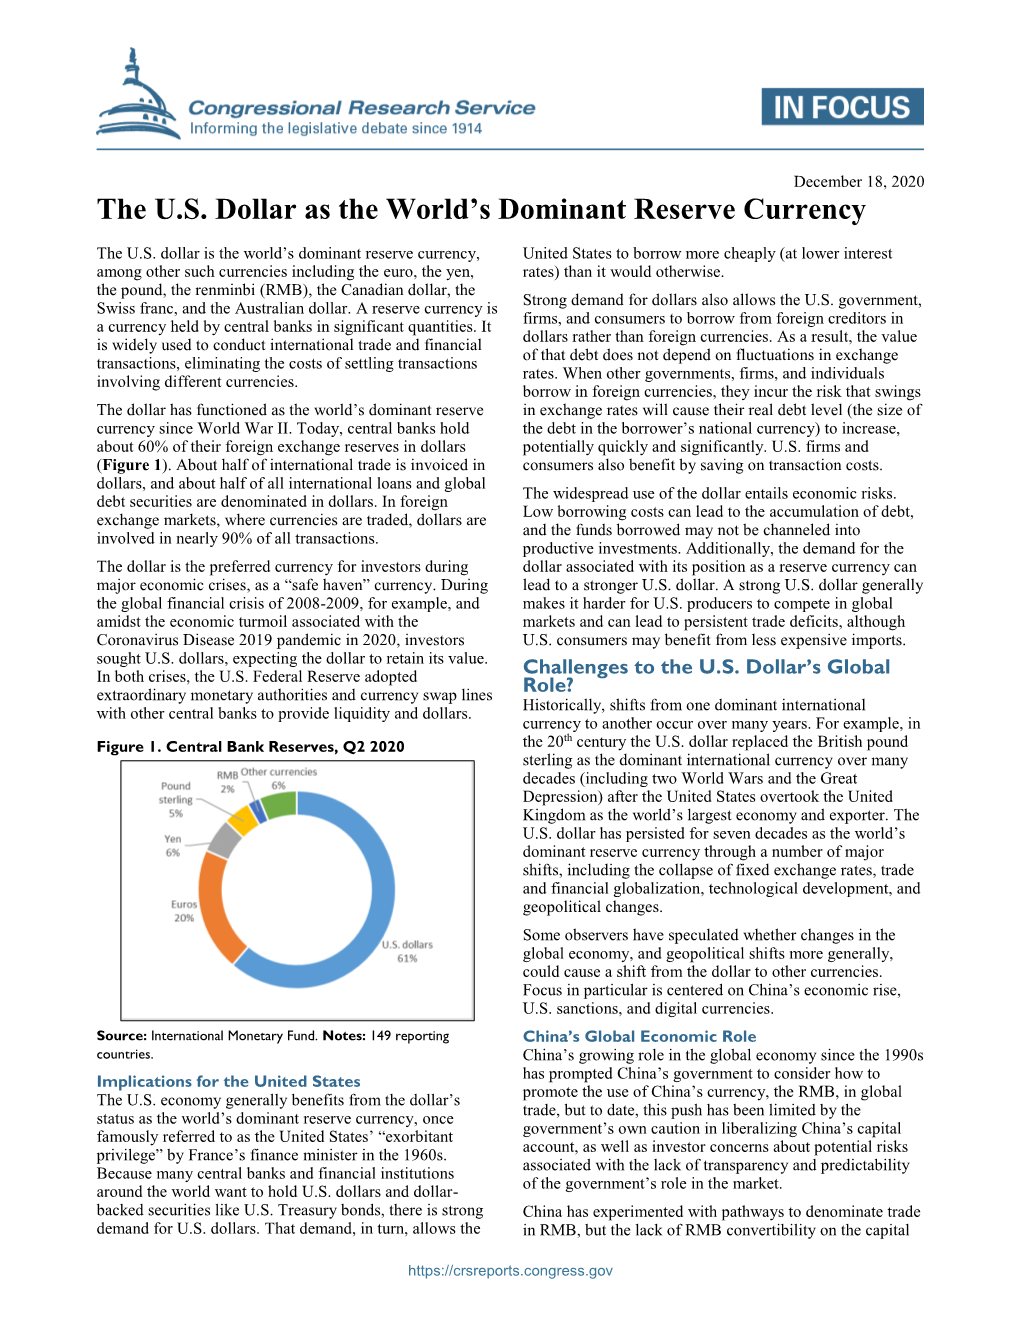 The U.S. Dollar As the World's Dominant Reserve Currency